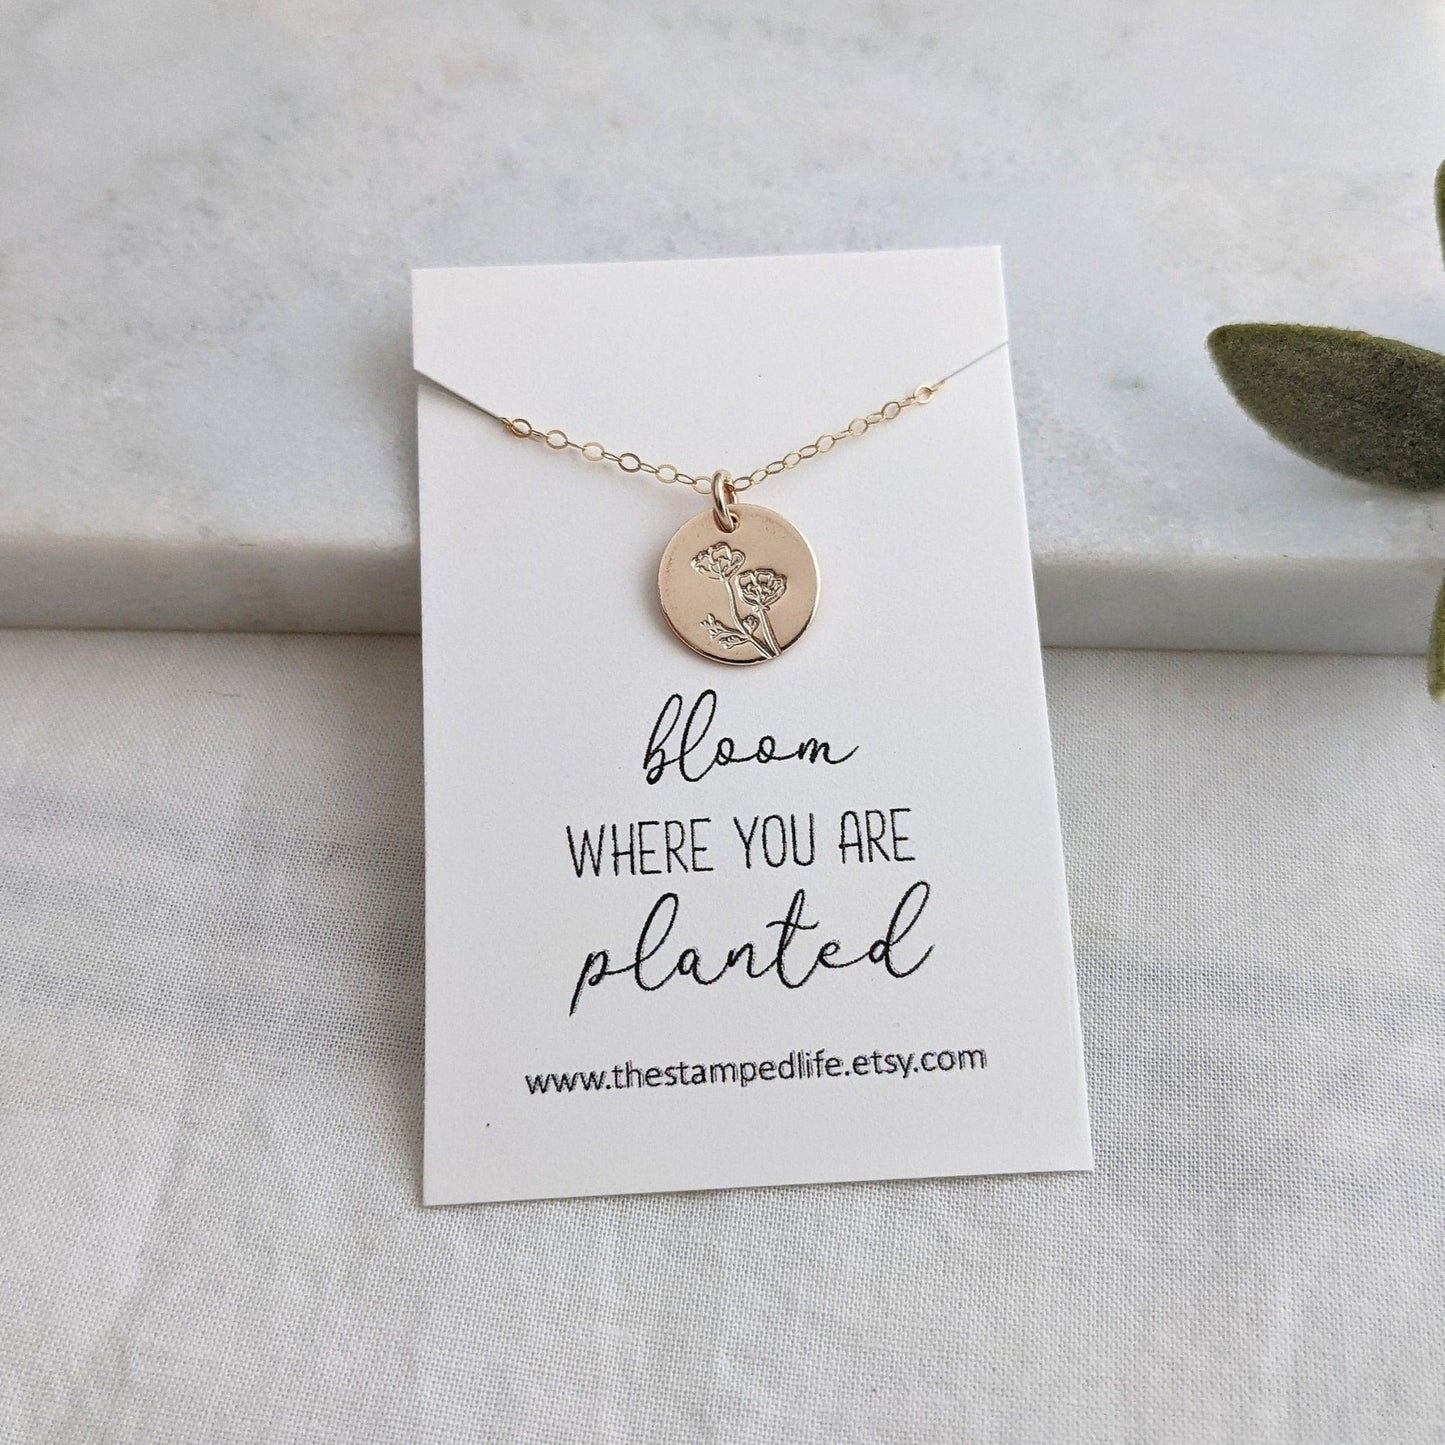 bloom where you are planted necklace gold disc with flower design